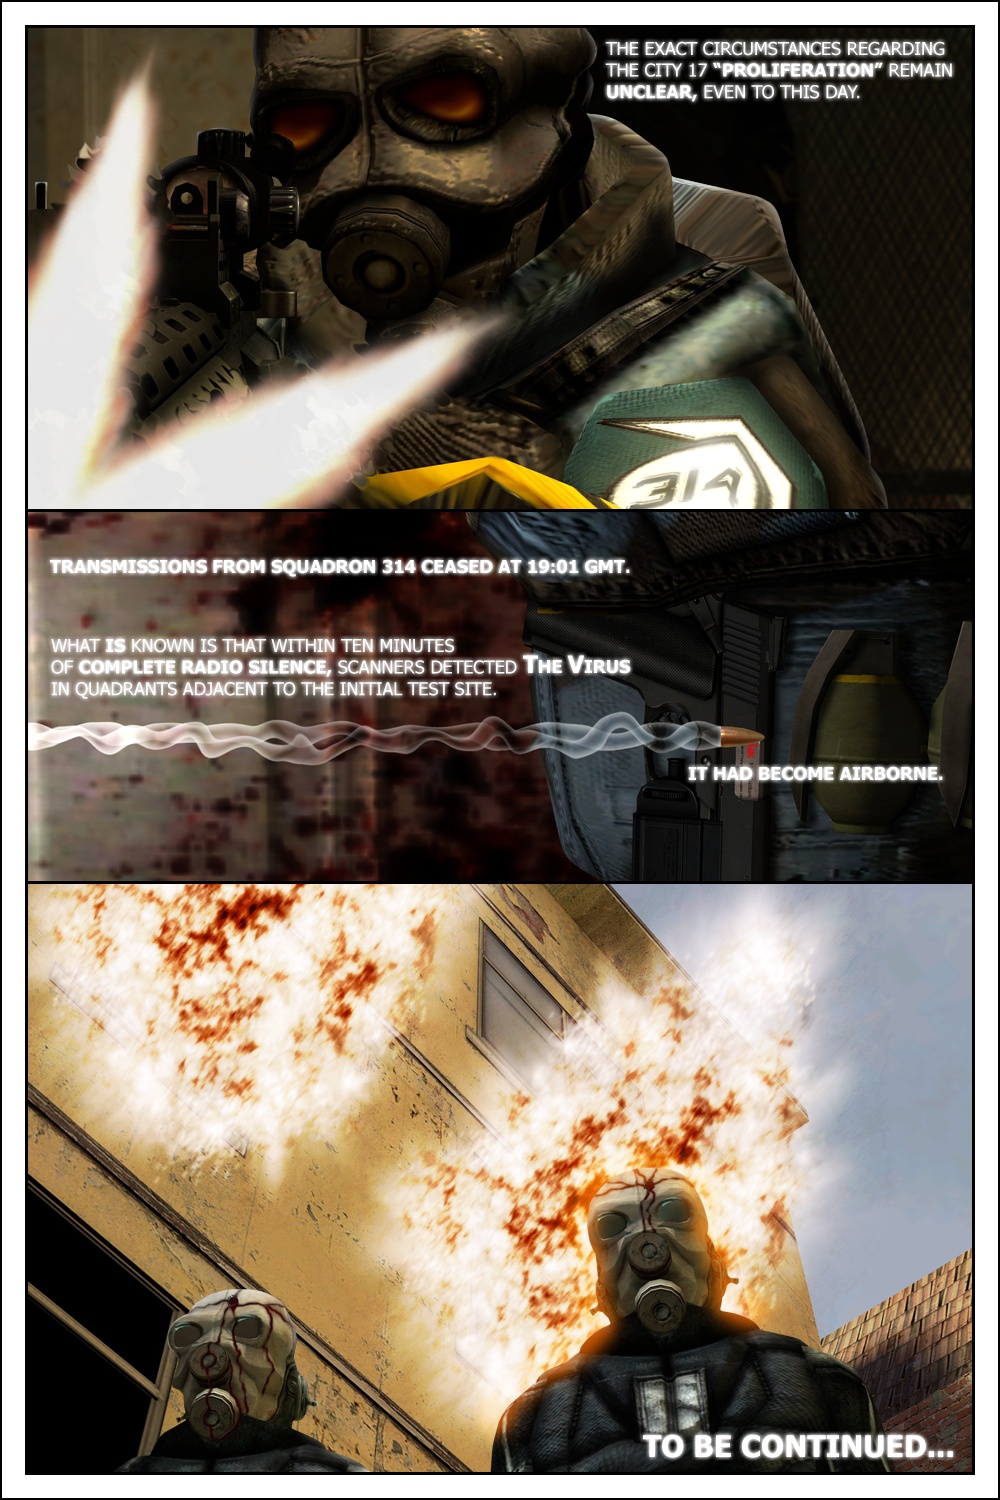 The other soldiers start firing at the infected. The narration declares: the exact circumstances regarding the City 17 proliferation remain unclear, even to this day. A stray bullet is seen in slow-motion going in the direction of a grenade. The narrration continues: transmissions from Squadron 314 ceased at 19:01 GMT. What is known is that within ten minutes of complete radio silence, scanners detected the virus in quadrants adjacent to the initial test site. The narration concludes: it had become airborne. The whole apartment floor explodes. Meanwhile, outside, the two Civil Protection officers, shot in the head, rise back from the dead, possessed by the infection. The comic ends.